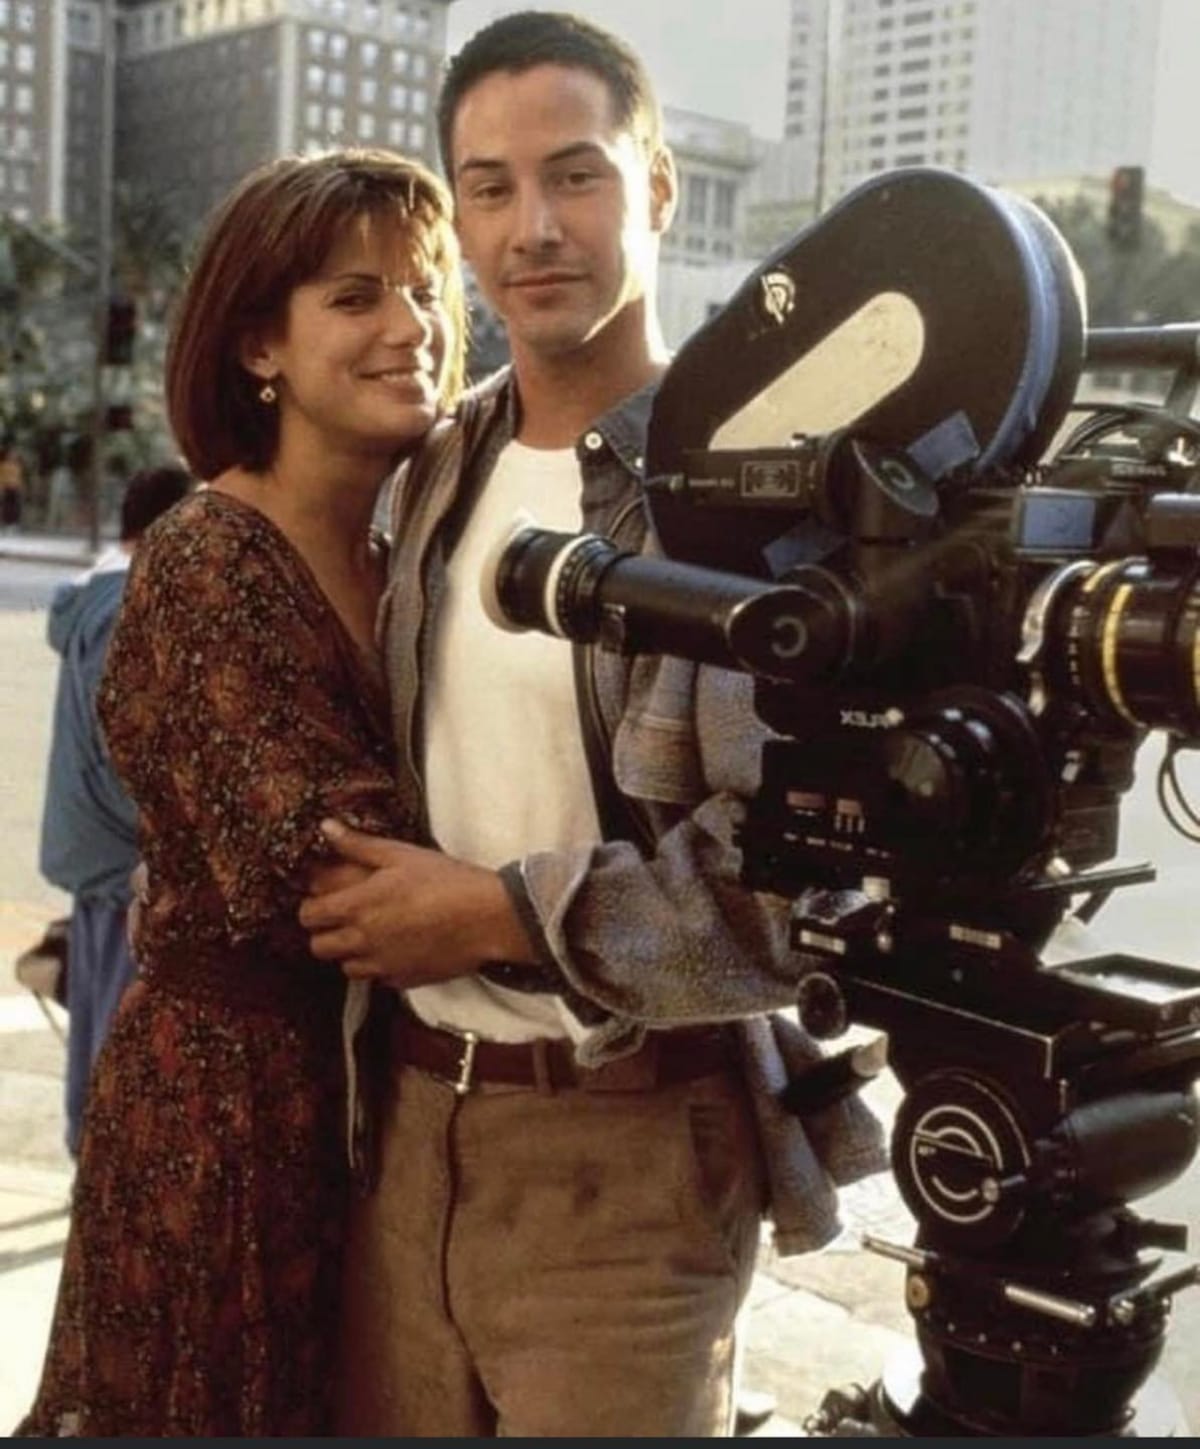 Sandra Bullock and Keanu Reeves hug and smile for the camera in their Speed costumes, standing beside a black film camera